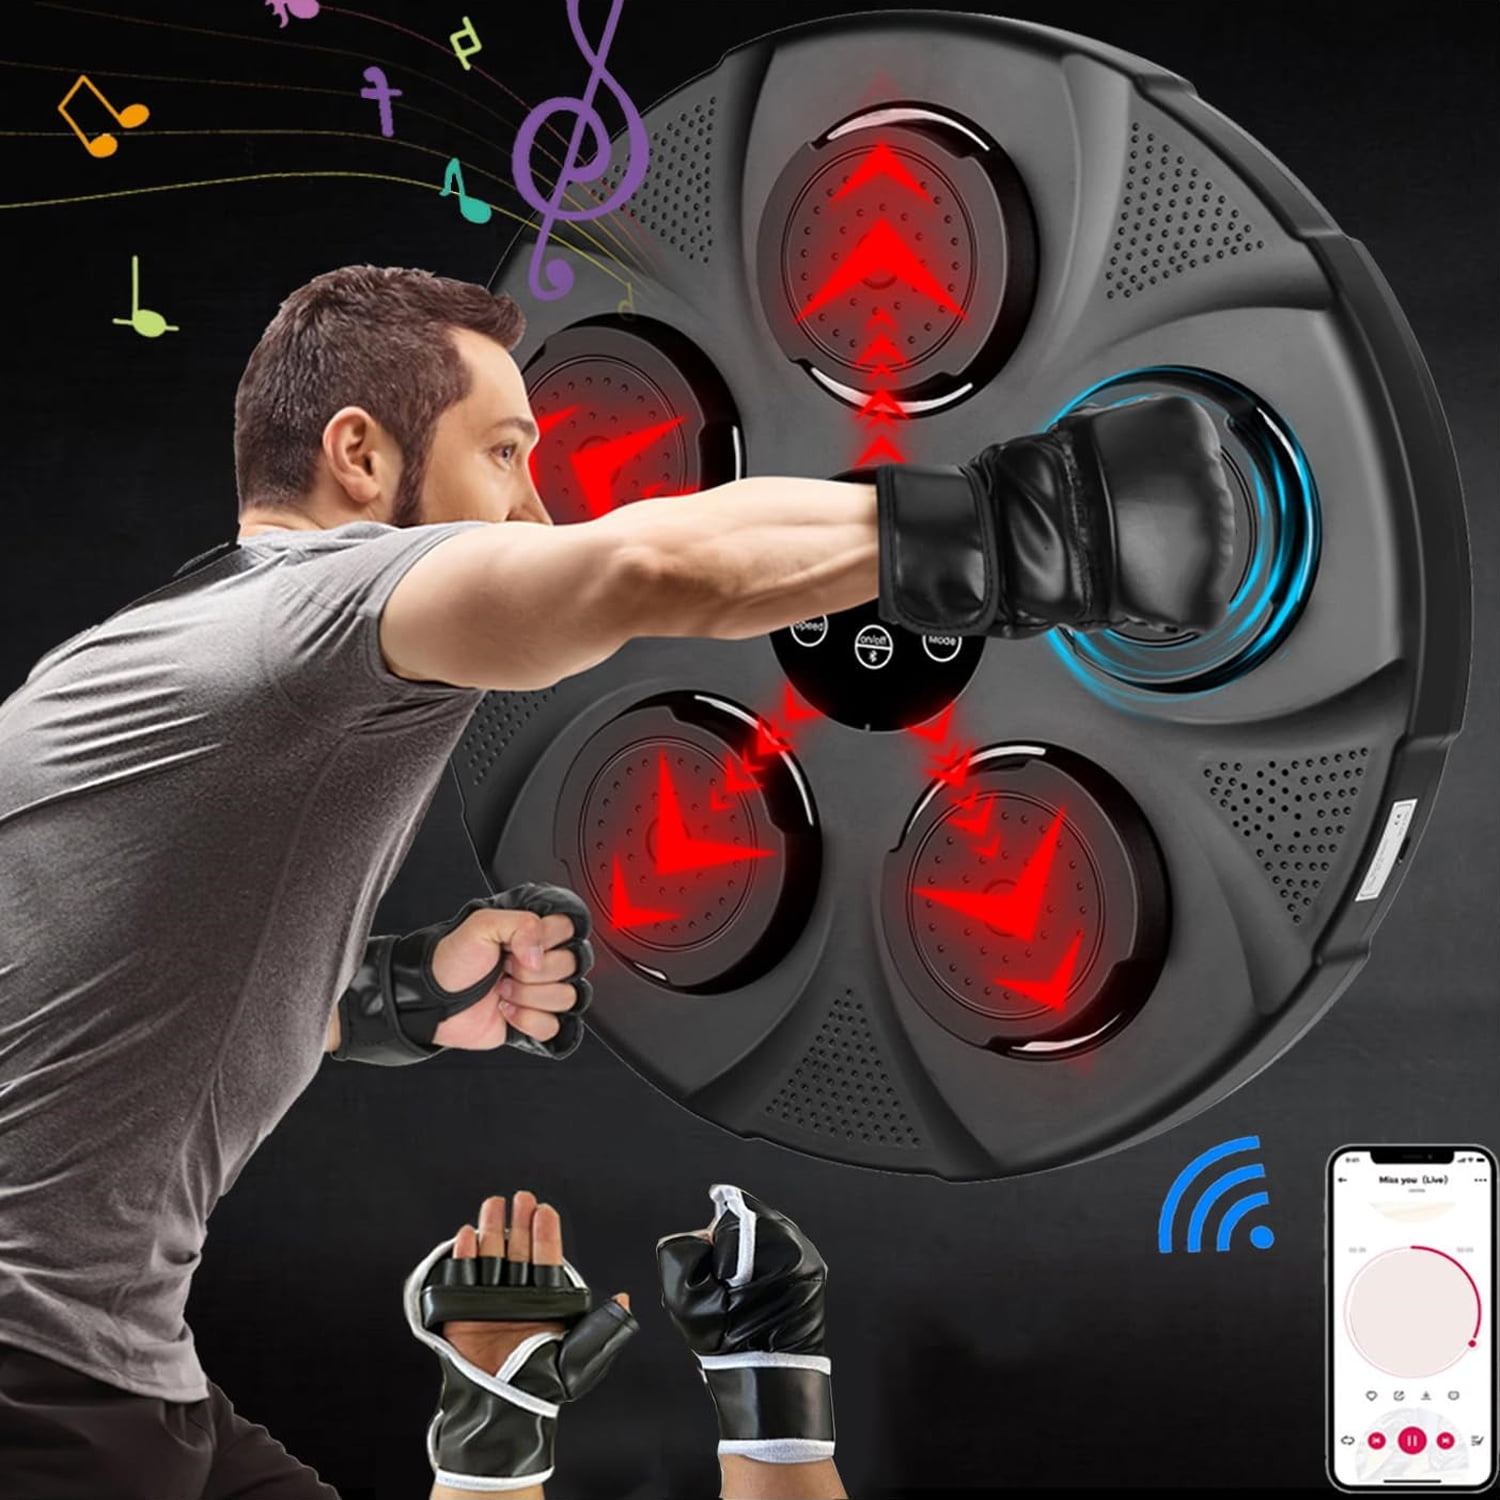 Untica Music Boxing Machine, Smart Bluetooth Connection Boxing Equipment,  Fight Reaction Training Boxing Pad, Release Pressure Wall Mounted Punching